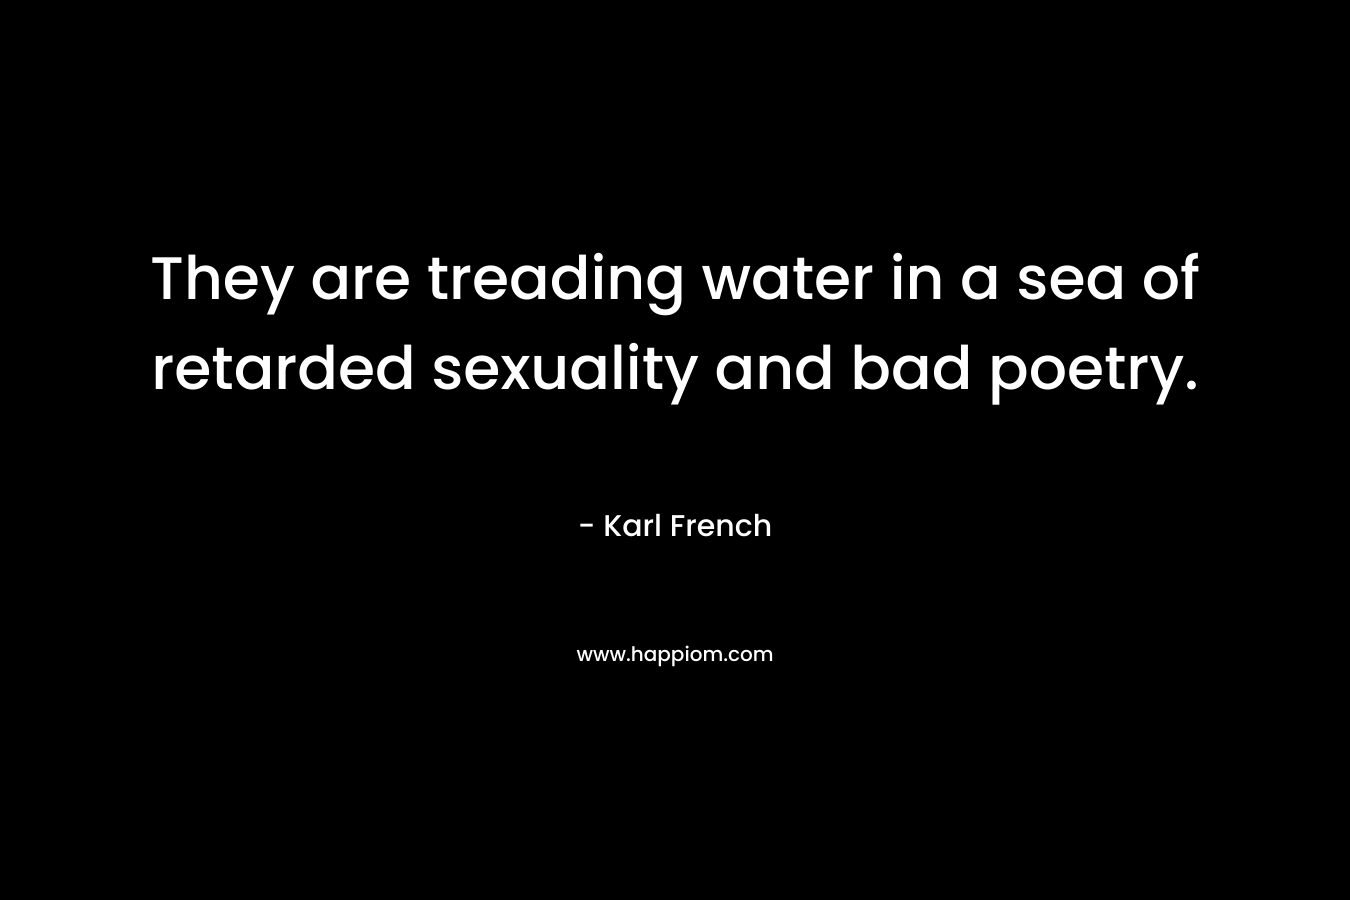 They are treading water in a sea of retarded sexuality and bad poetry.